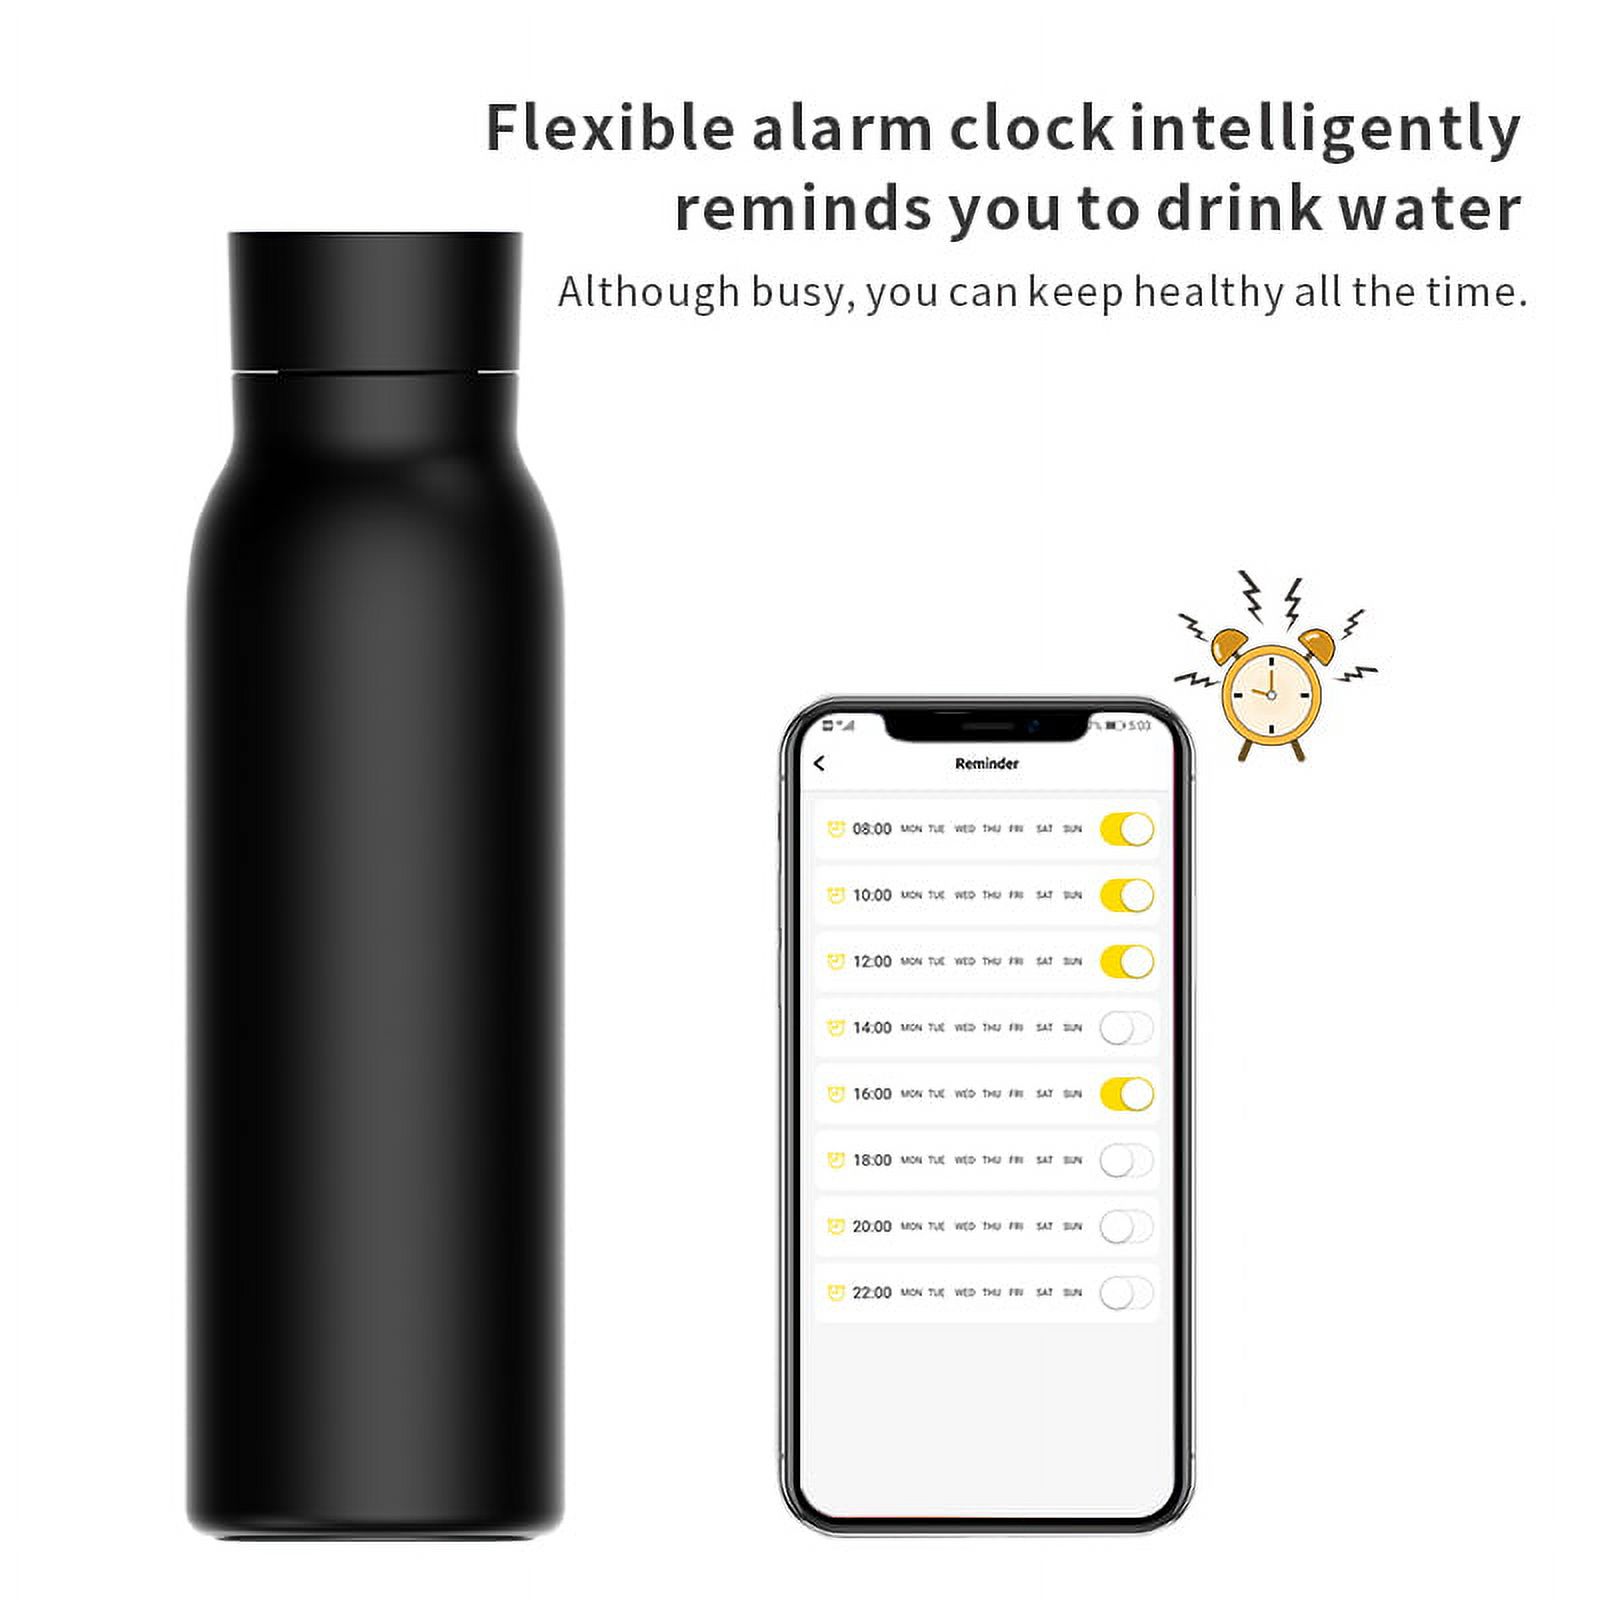 Stainless Steel Smart Water Bottle, Leak Proof, Double Walled, Keep Drink  Hot & Cold, LCD Temperature Display